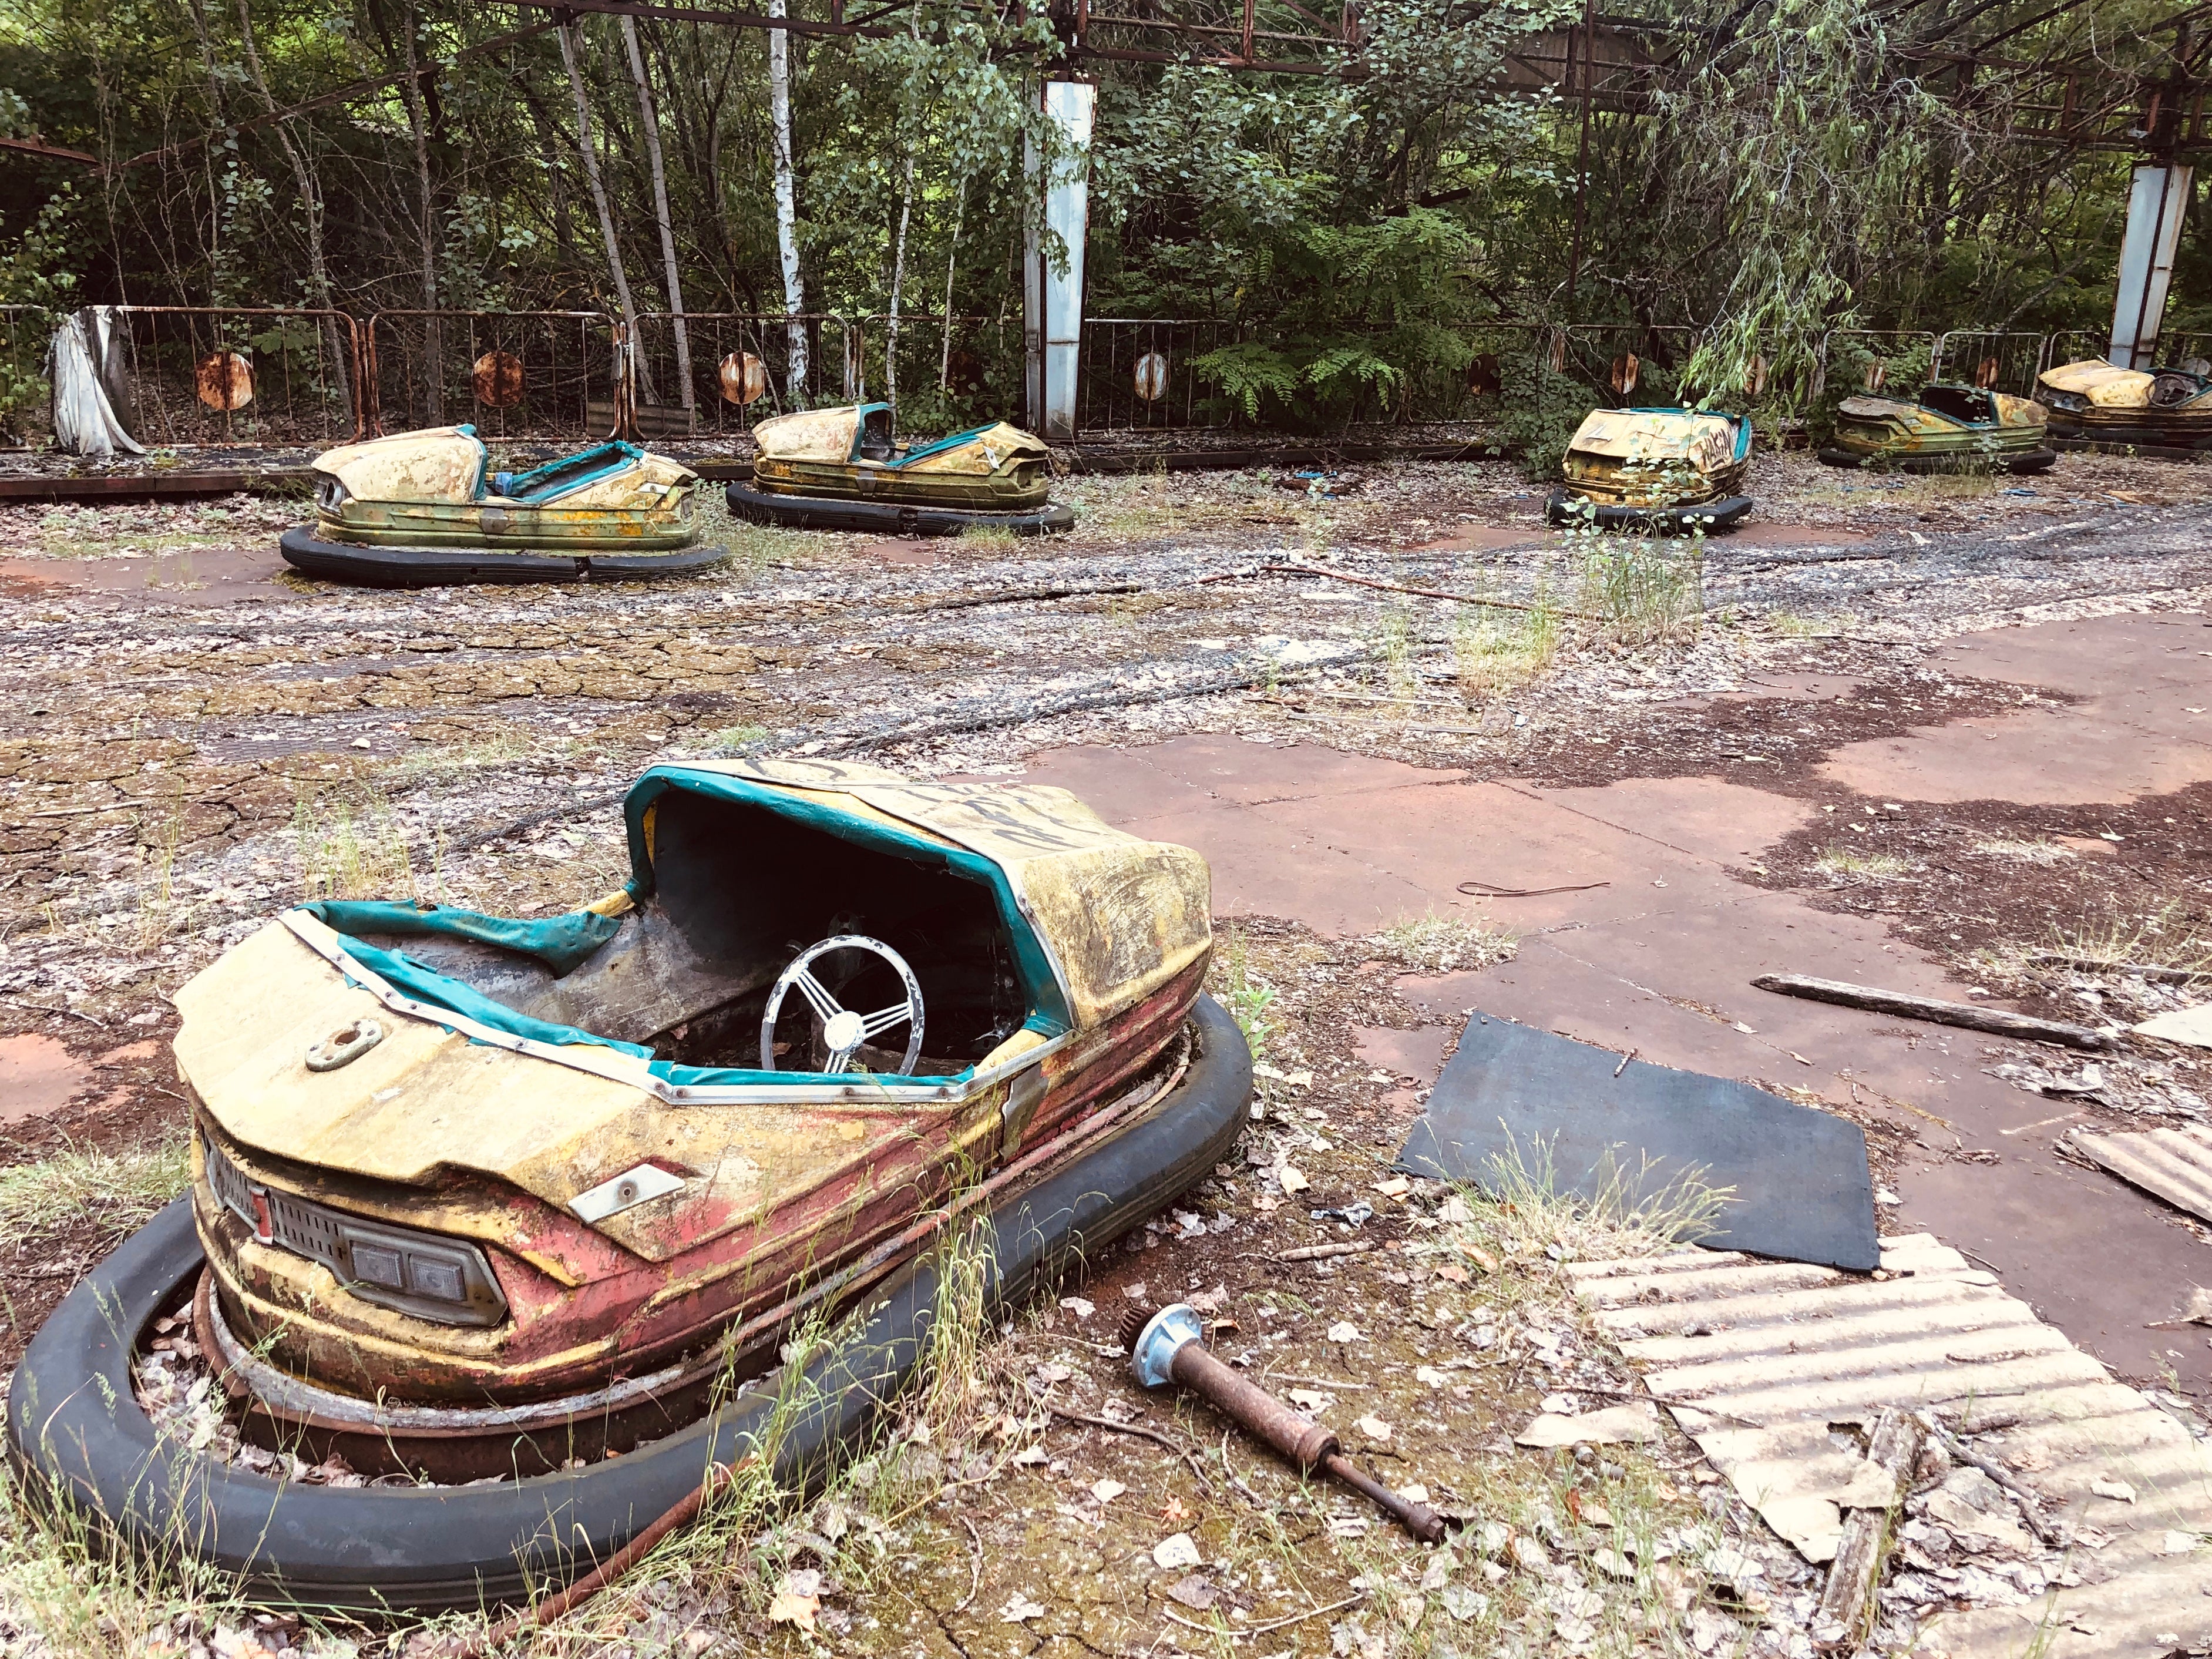 Broken dreams: an abandoned amusement park in Pripyat, the ‘ghost town’ outside Chernobyl